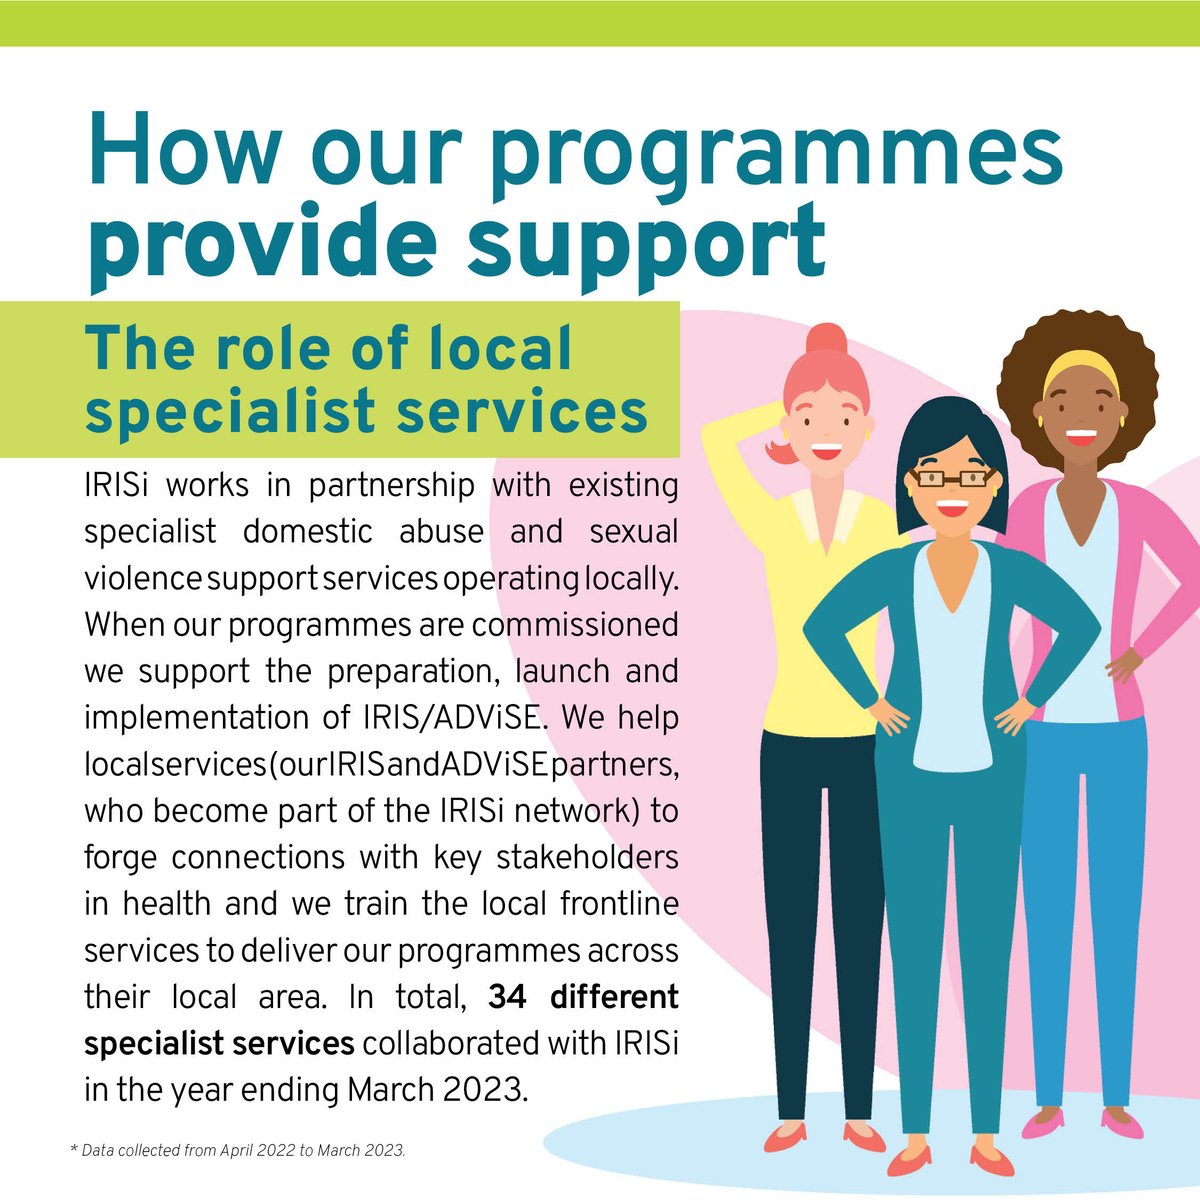 National Report 2022-2023: Just over 3,300 service users referred to IRIS or ADViSE received emotional support from the Advocate Educator, who is embedded within the healthcare setting by our partners, the local specialist services. bit.ly/IRISI-NR2023